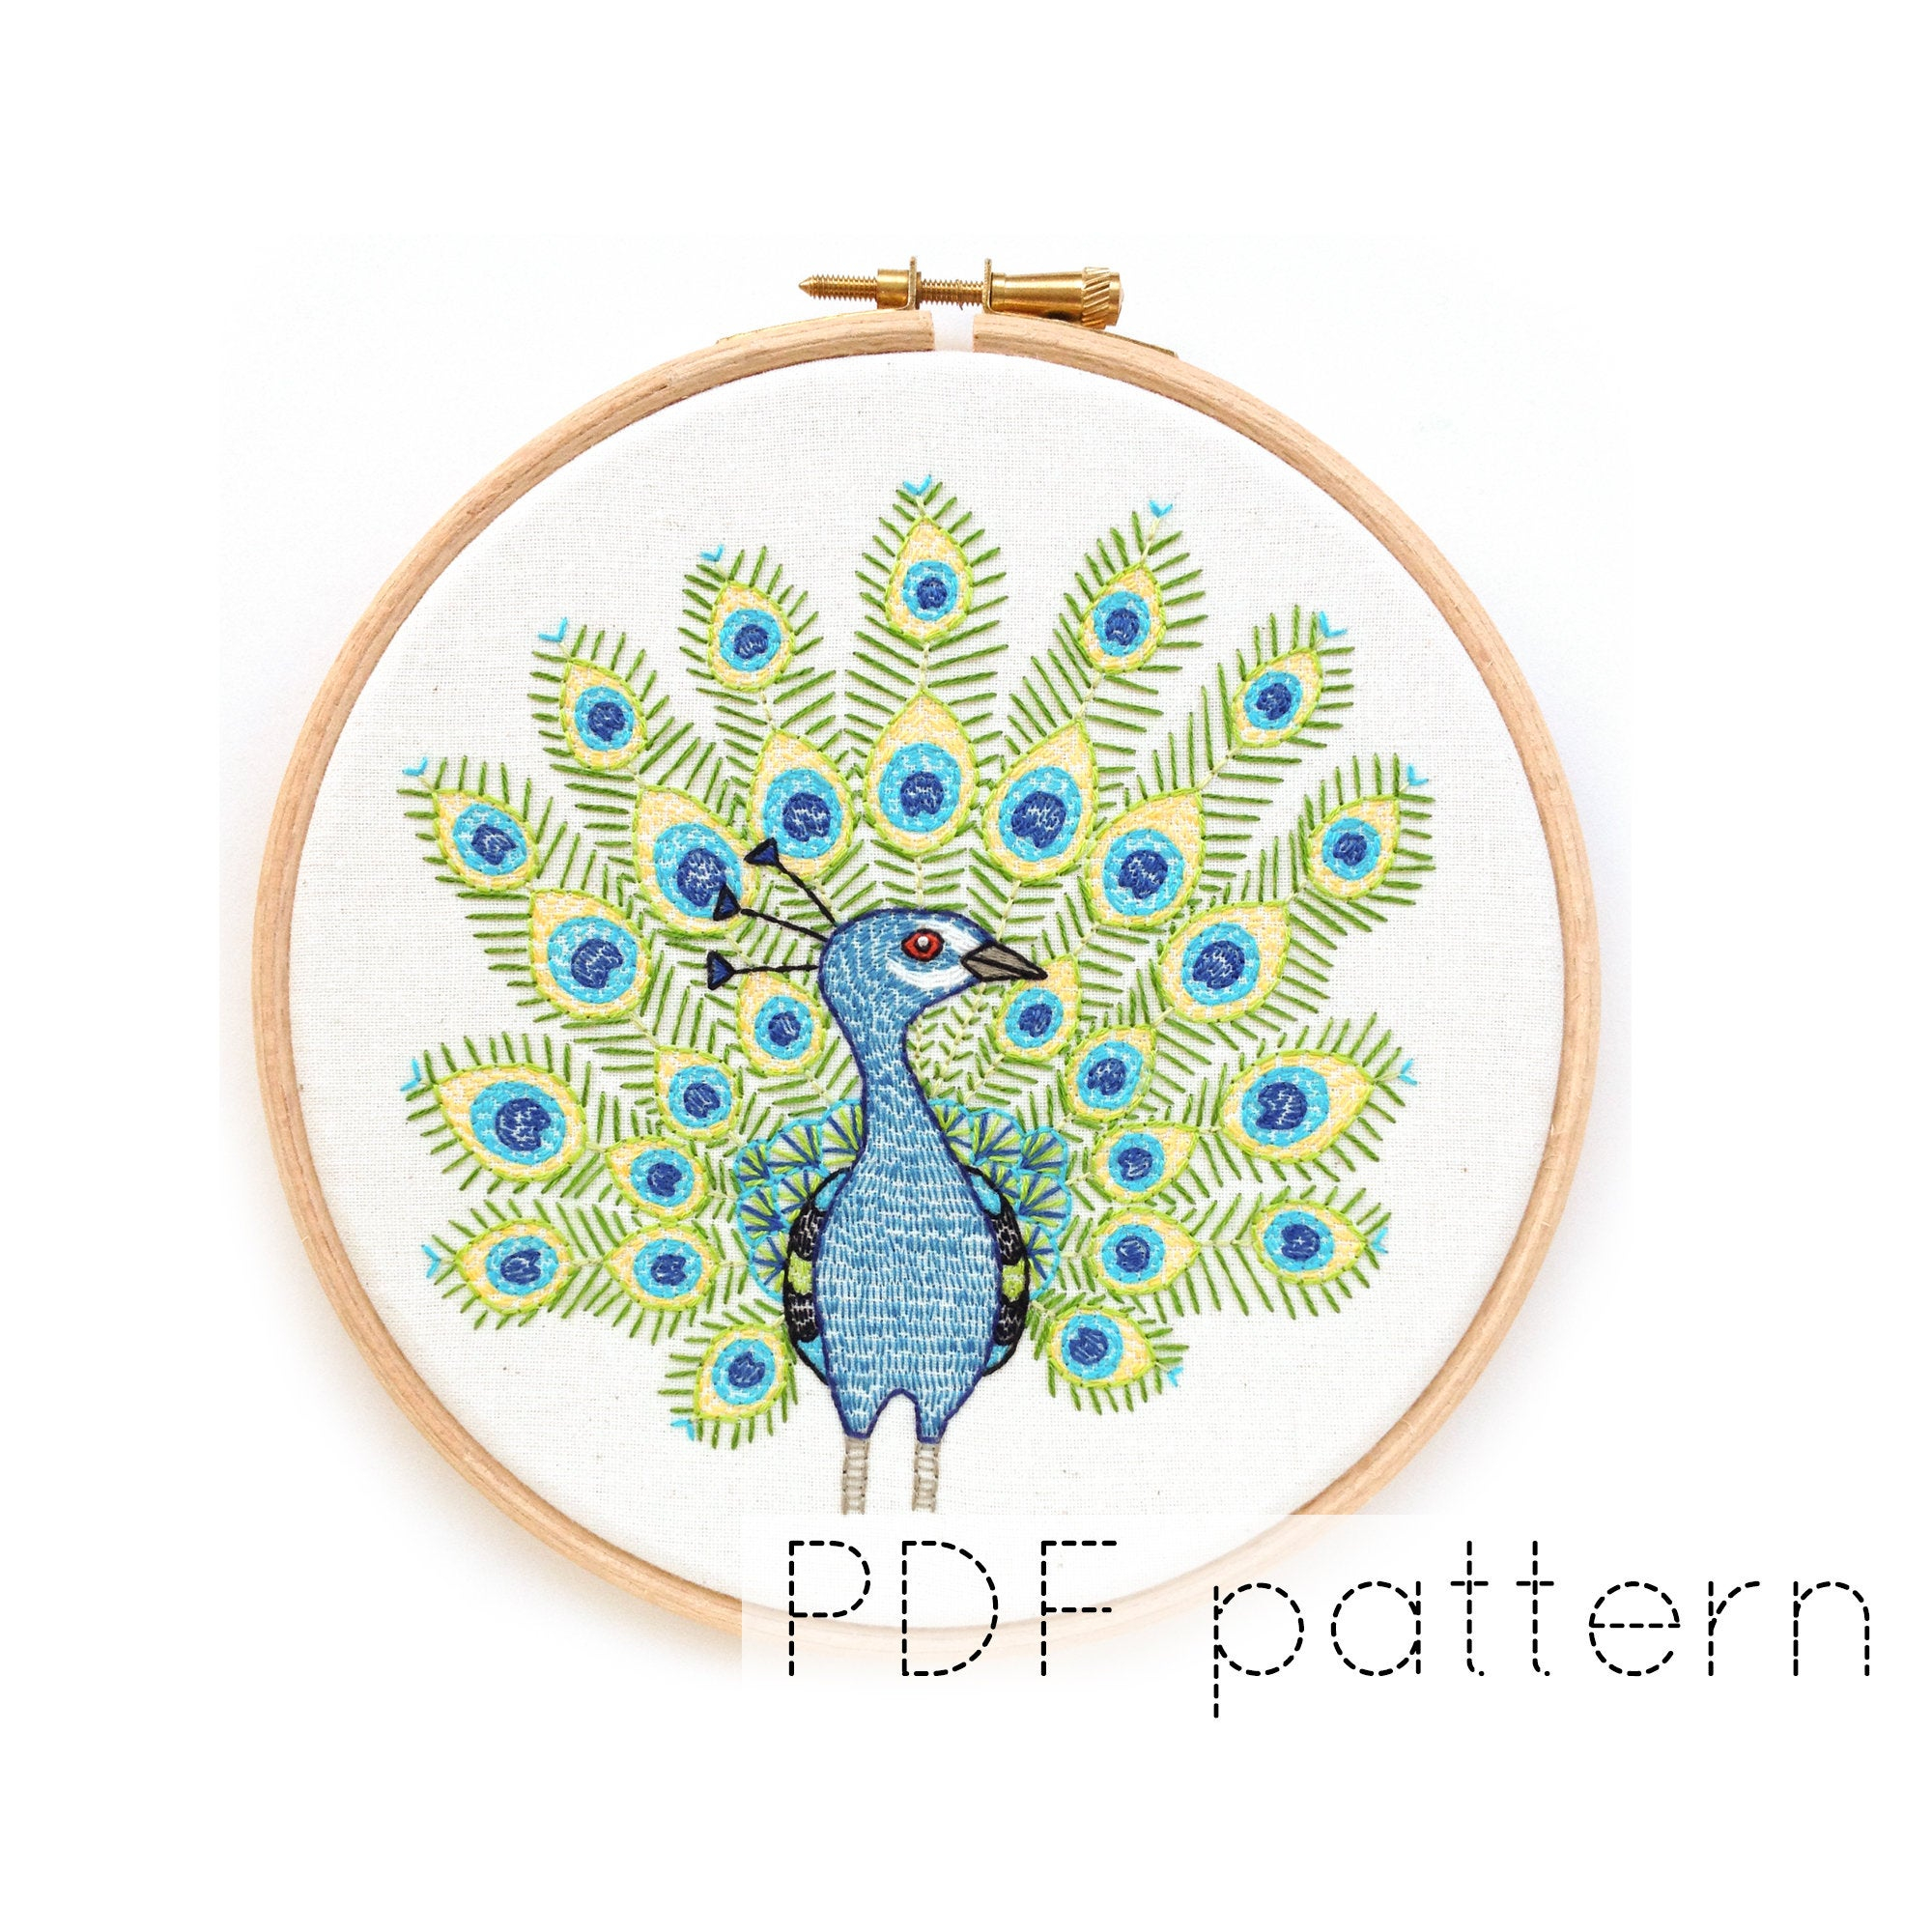 Peacock Embroidery Pattern Peacock Hand Embroidery Pattern Pdf Instant Download